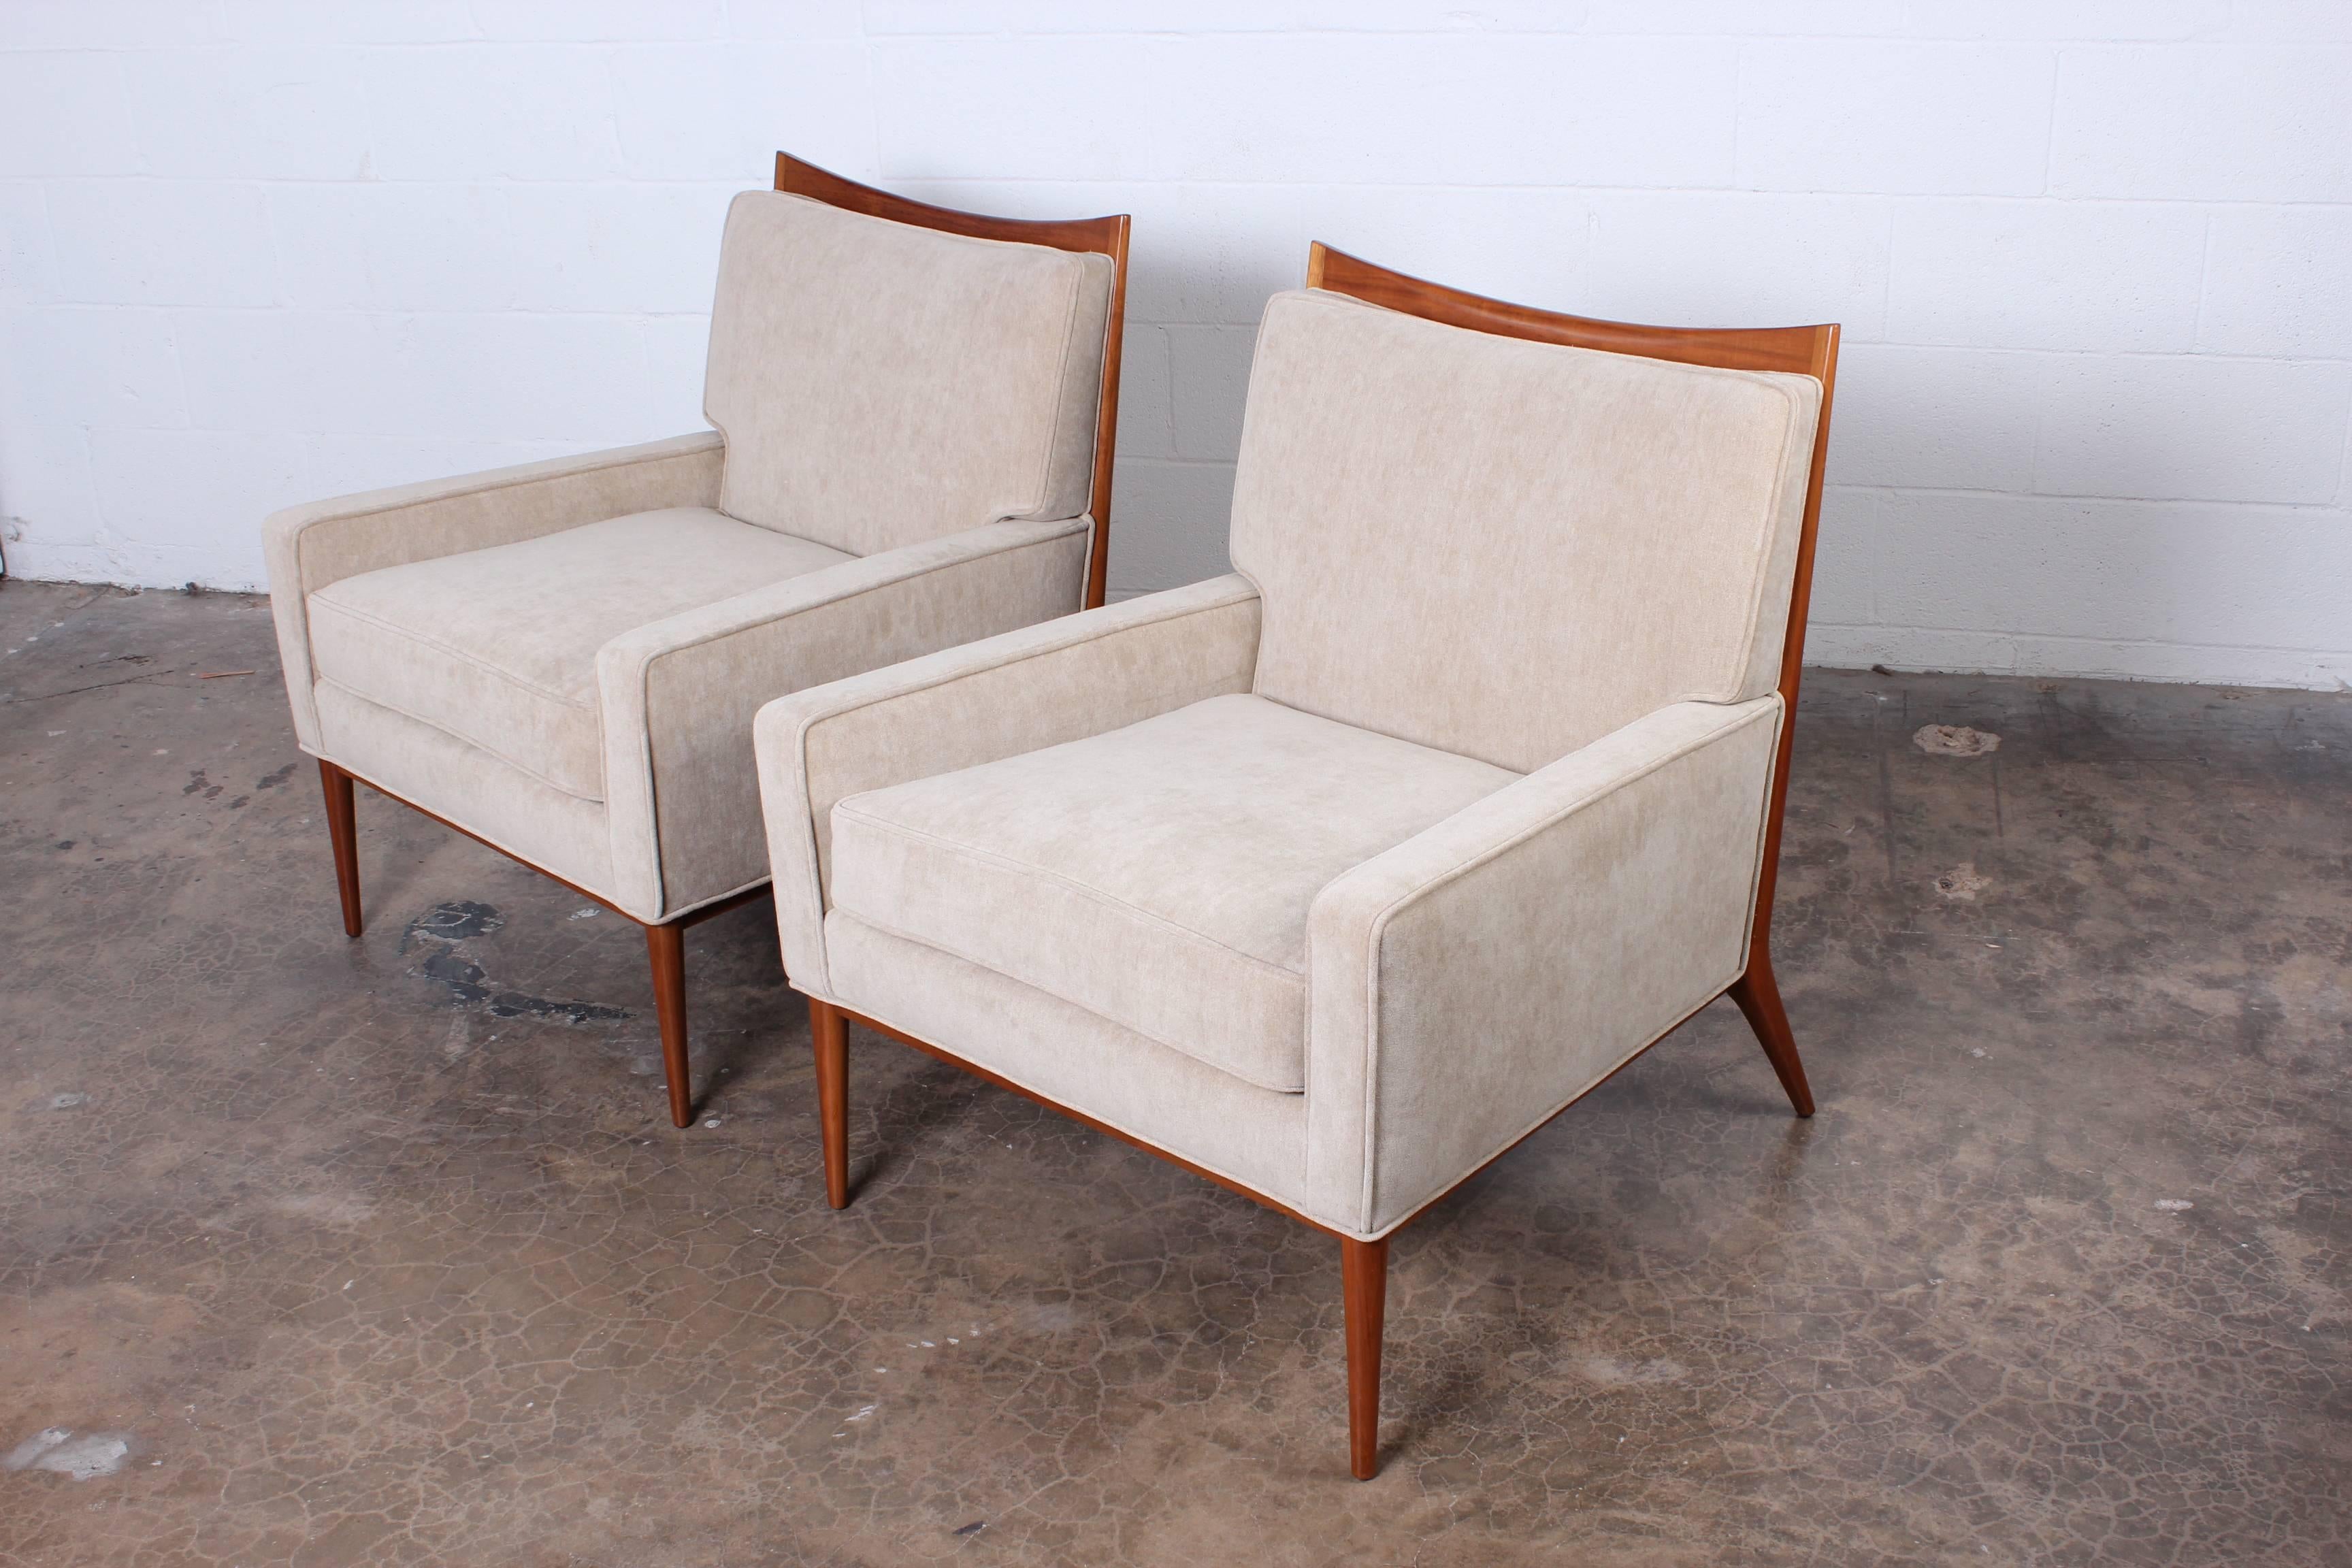 A pair of fully restored lounge chairs designed by Paul McCobb for directional. Reupholstered in Holly Hunt 